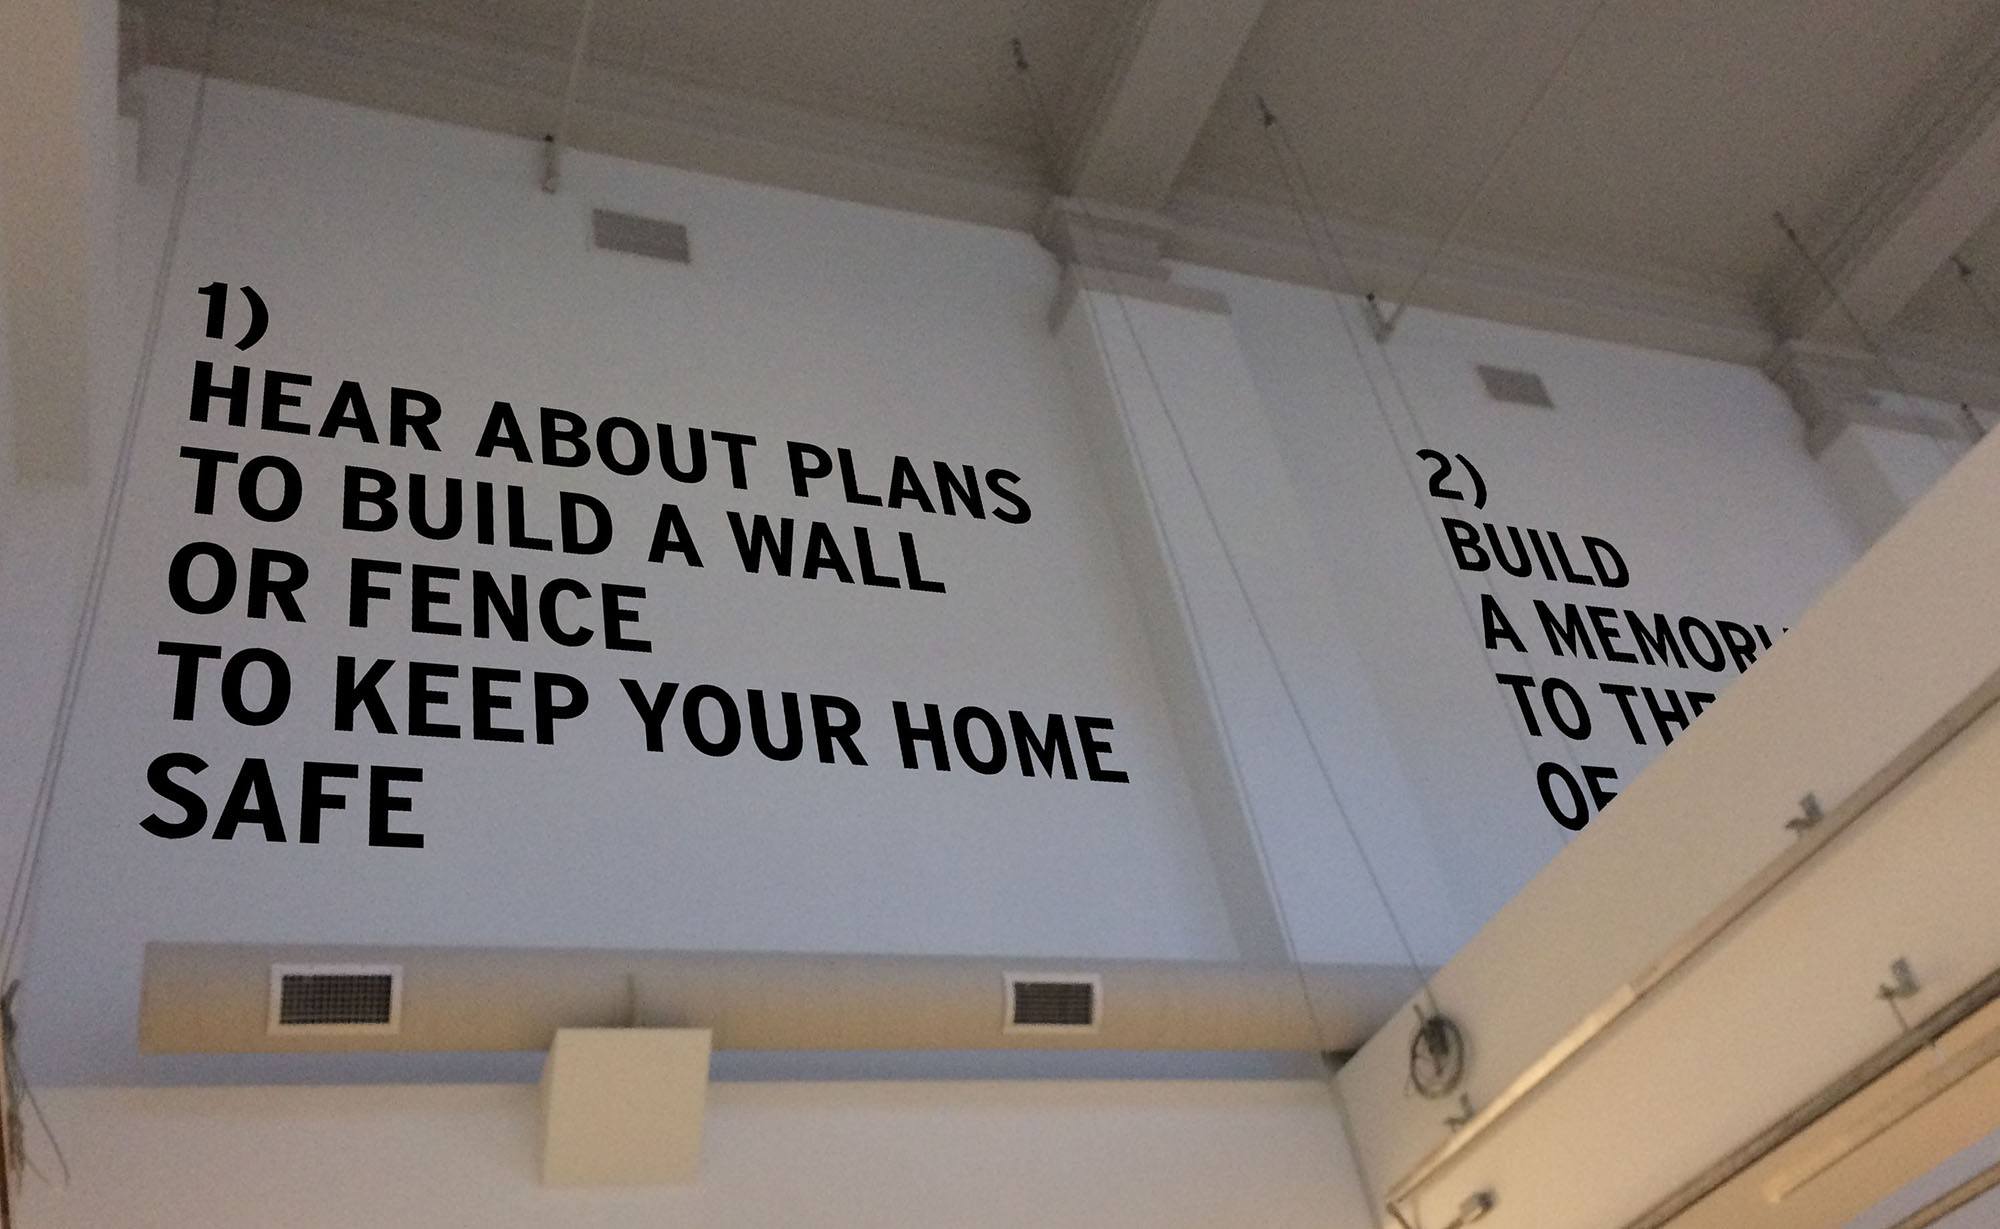 Text printed on a wall that reads "1) Hear about plans to build a wall or fence to keep your home safe"